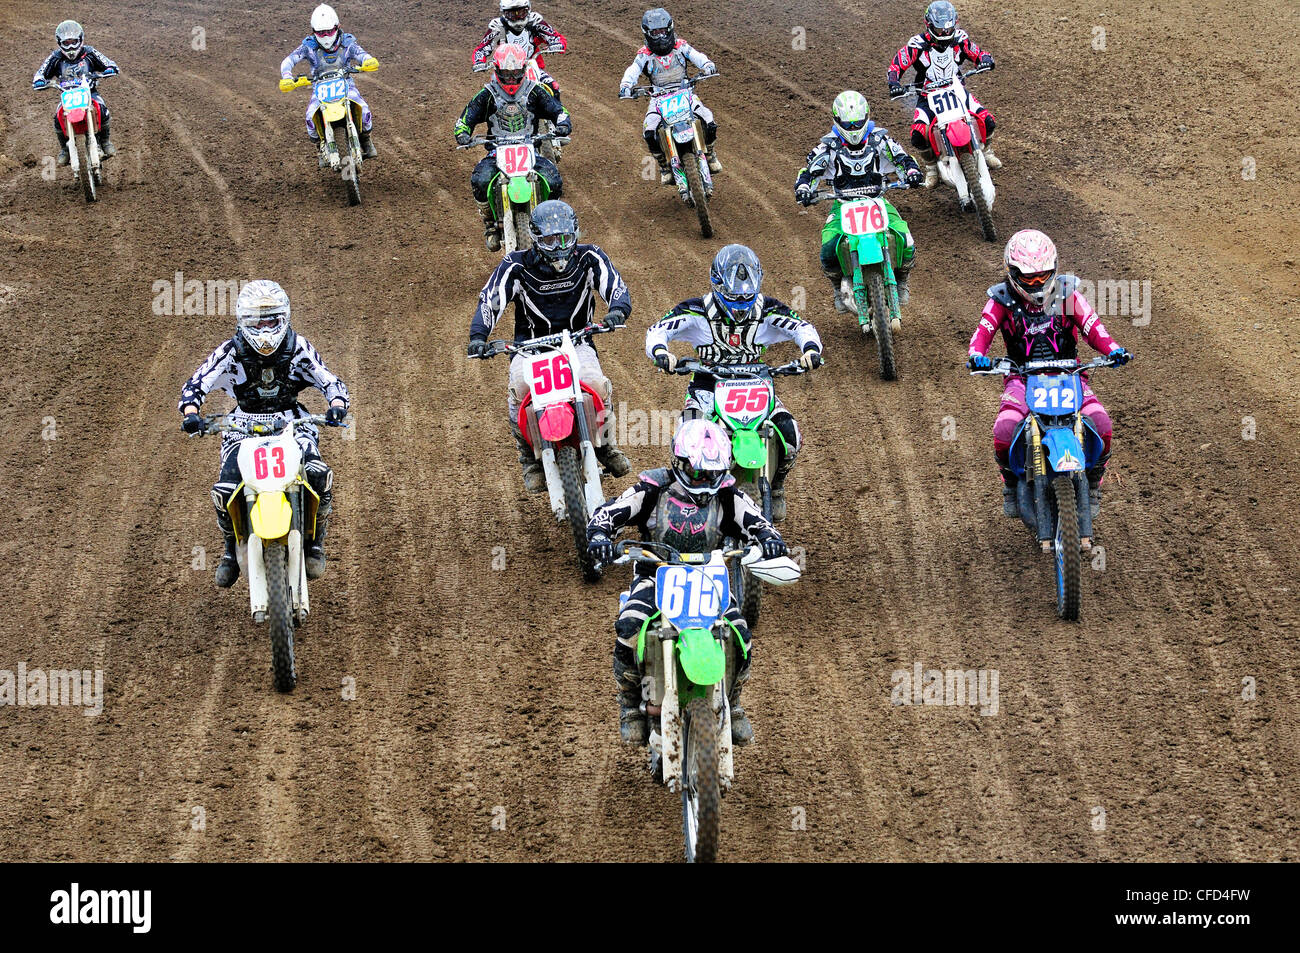 The start of a motocross race at the Wastelands track in Nanaimo, British Columbia, Canada. Stock Photo